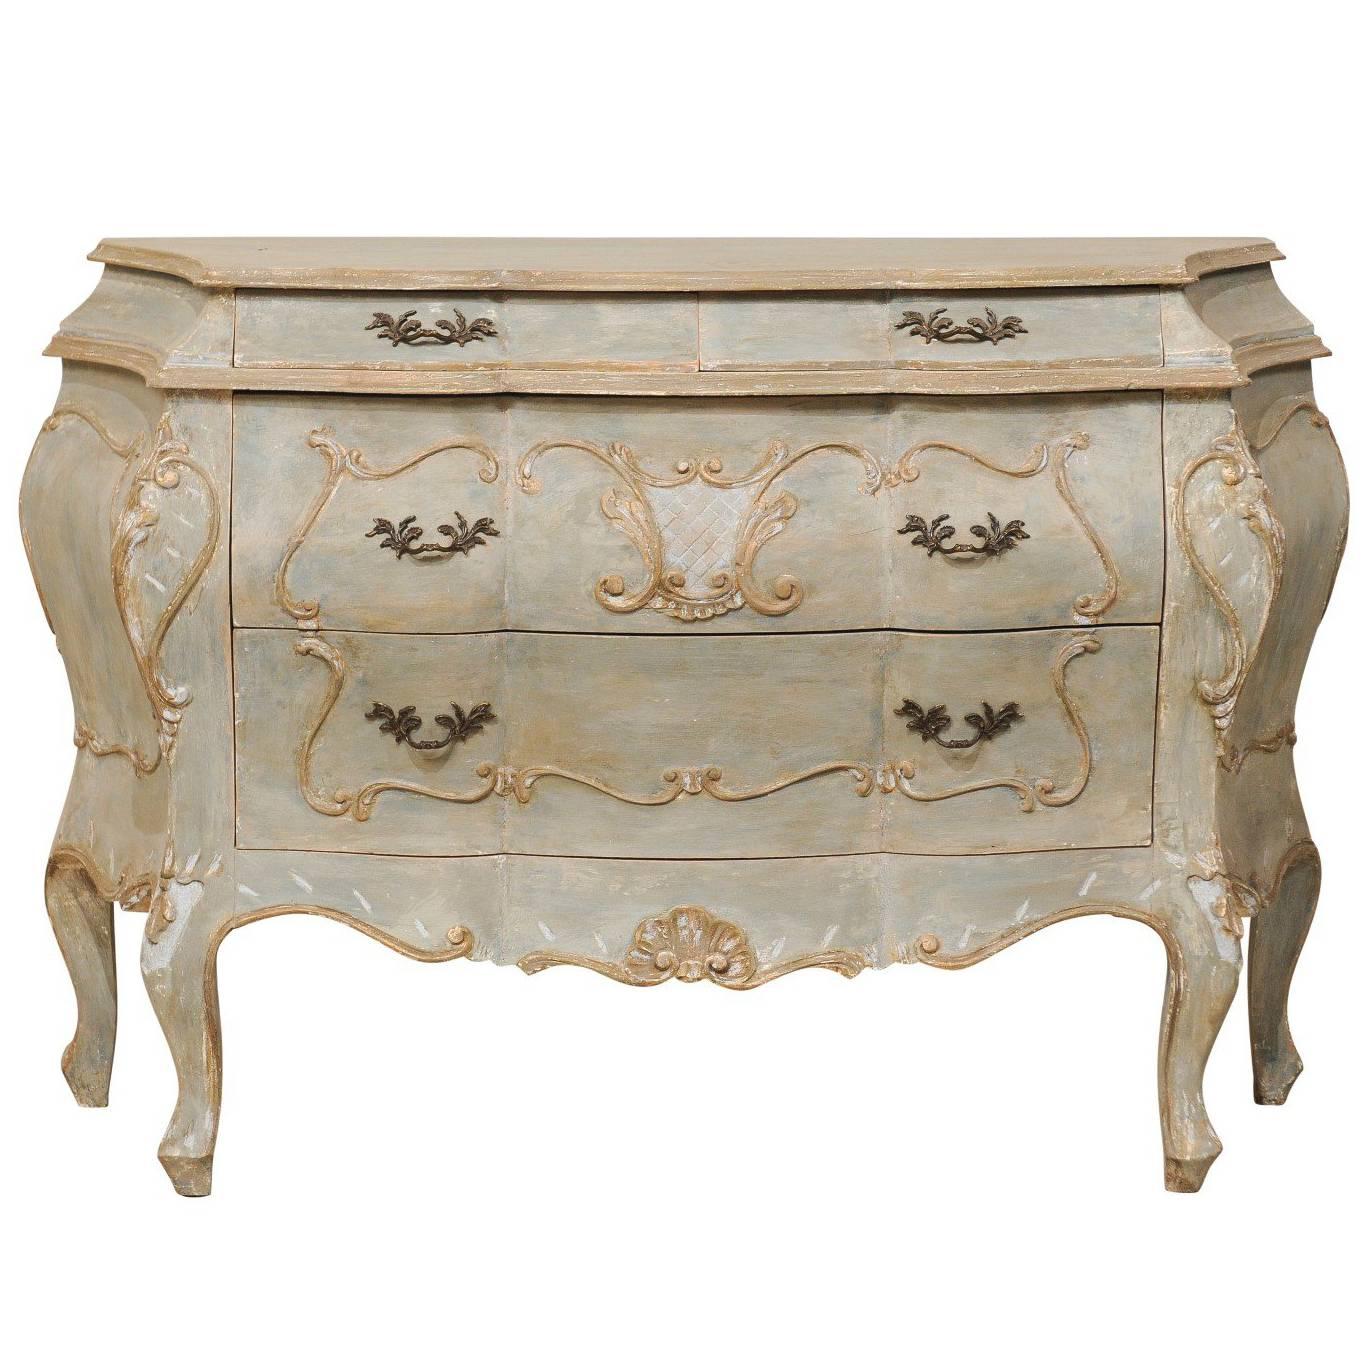 Painted Wood Bombé, Rococo Inpired Four-Drawer Chest Adorned with Shell Carving